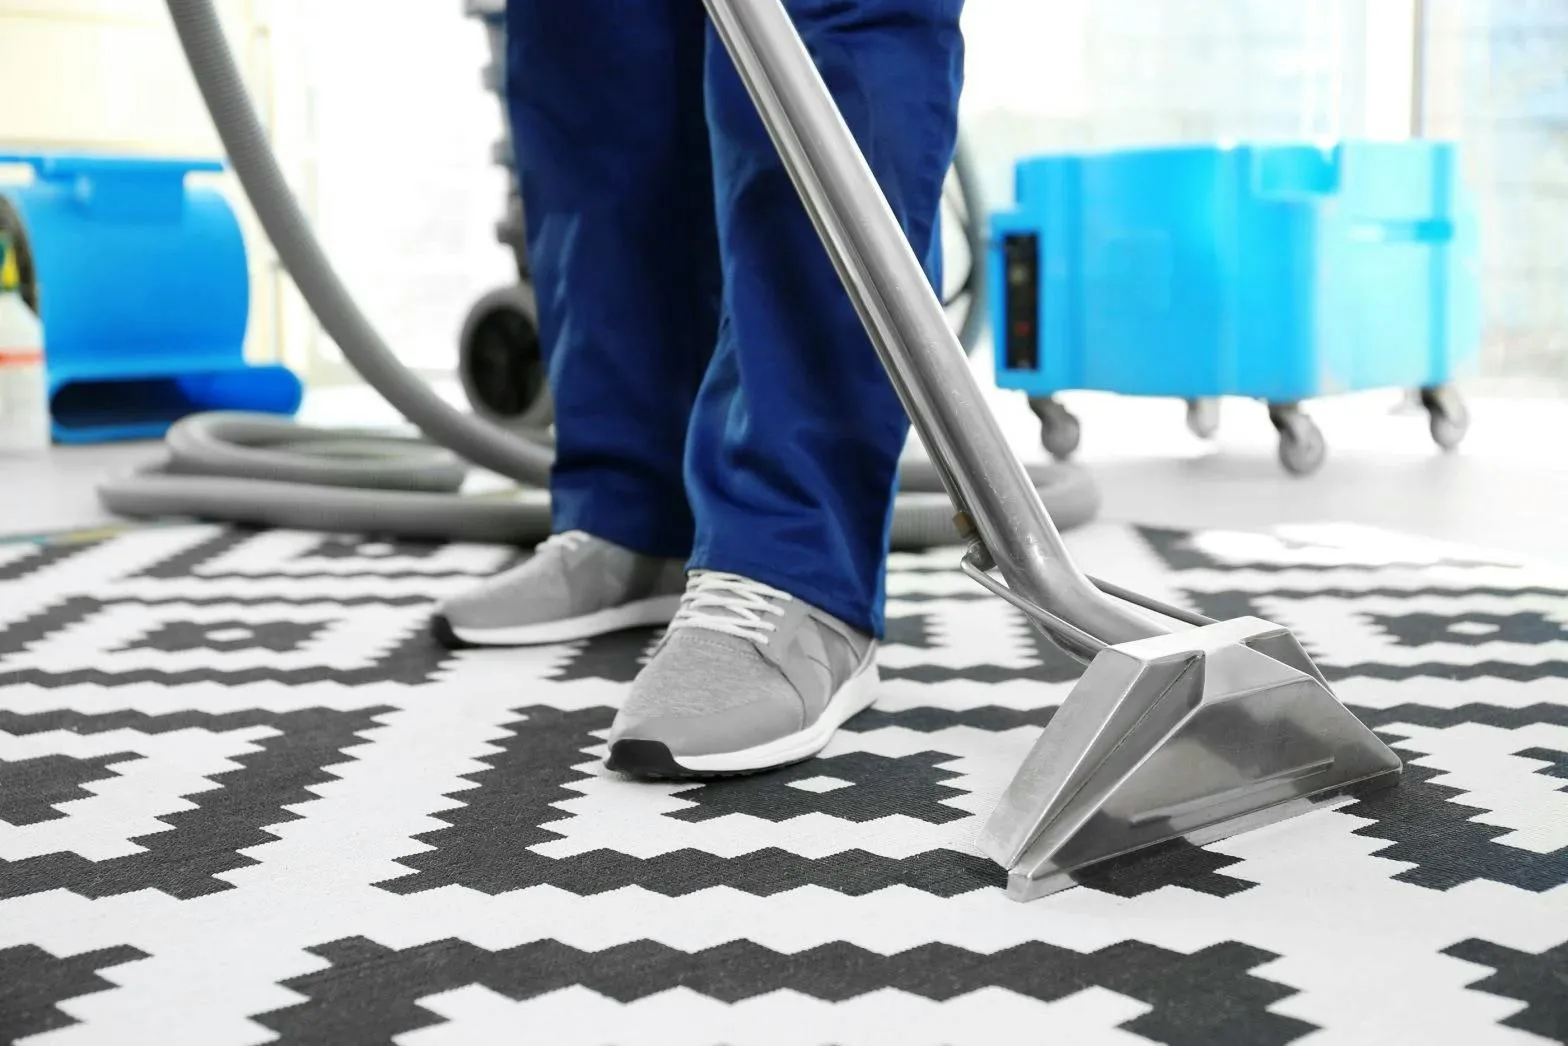 Counties Carpet Care: Your Trusted Partner for Professional Carpet Cleaning